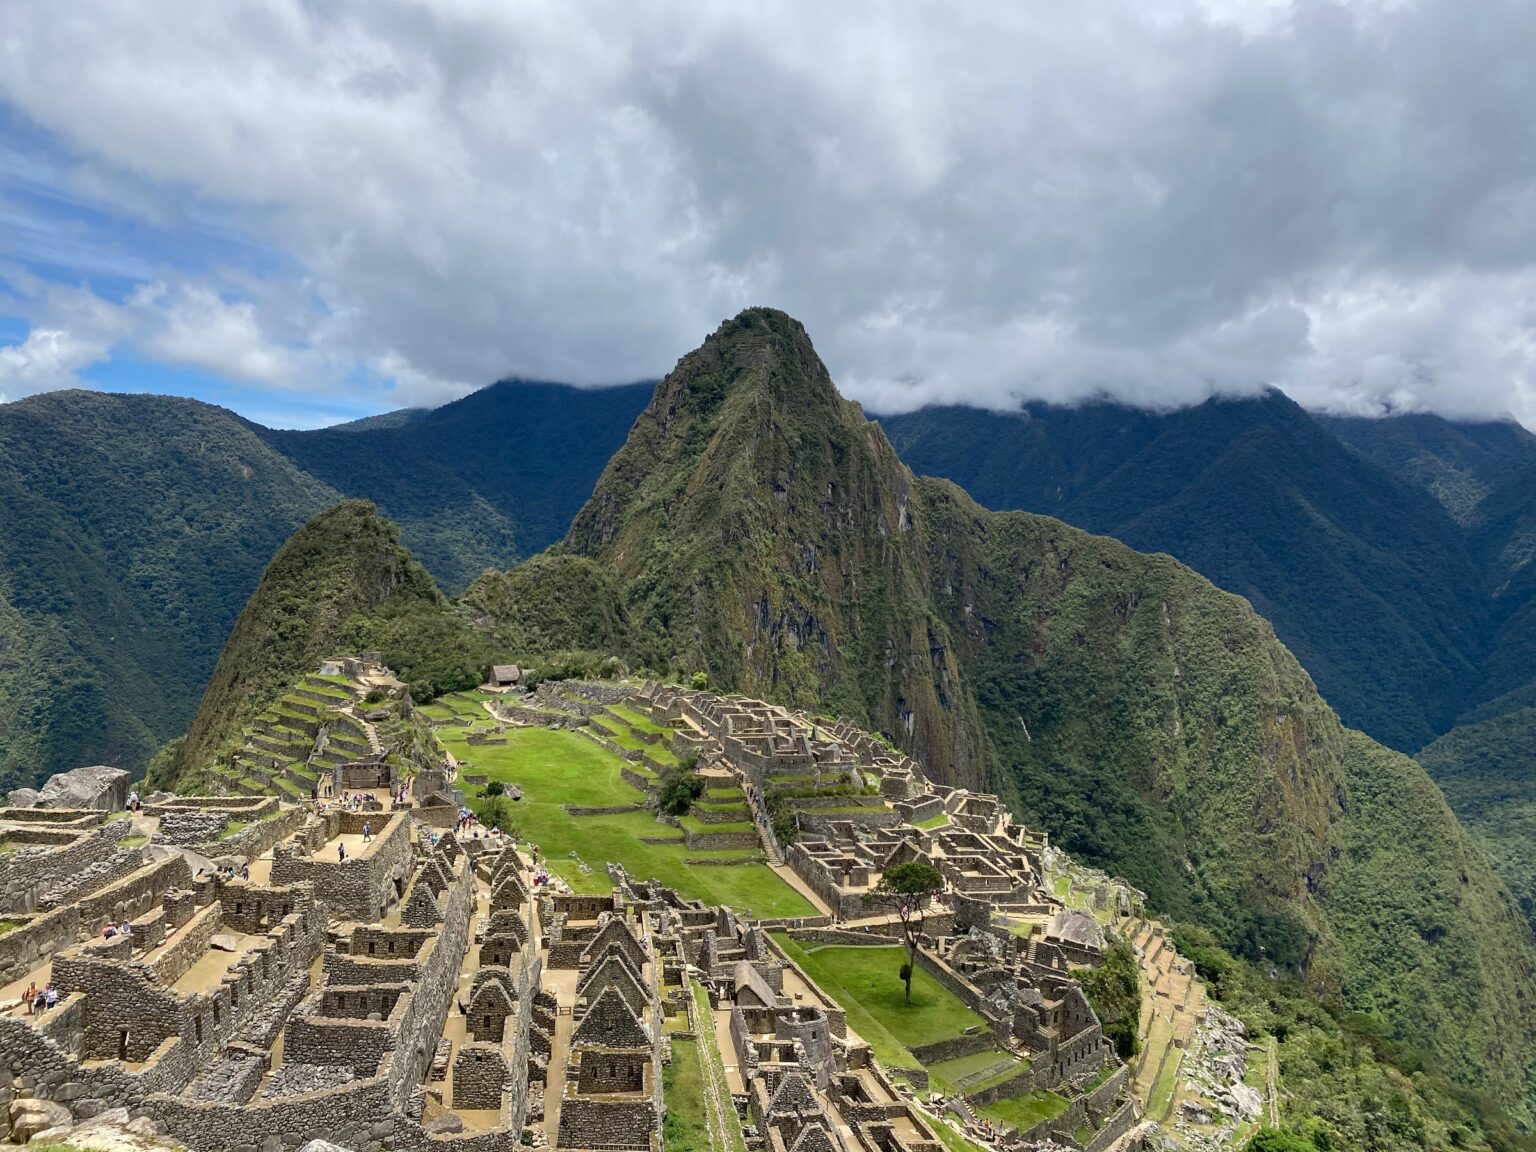 After 8 Months Closed, Finally Machu Picchu is Reopened for Tourists